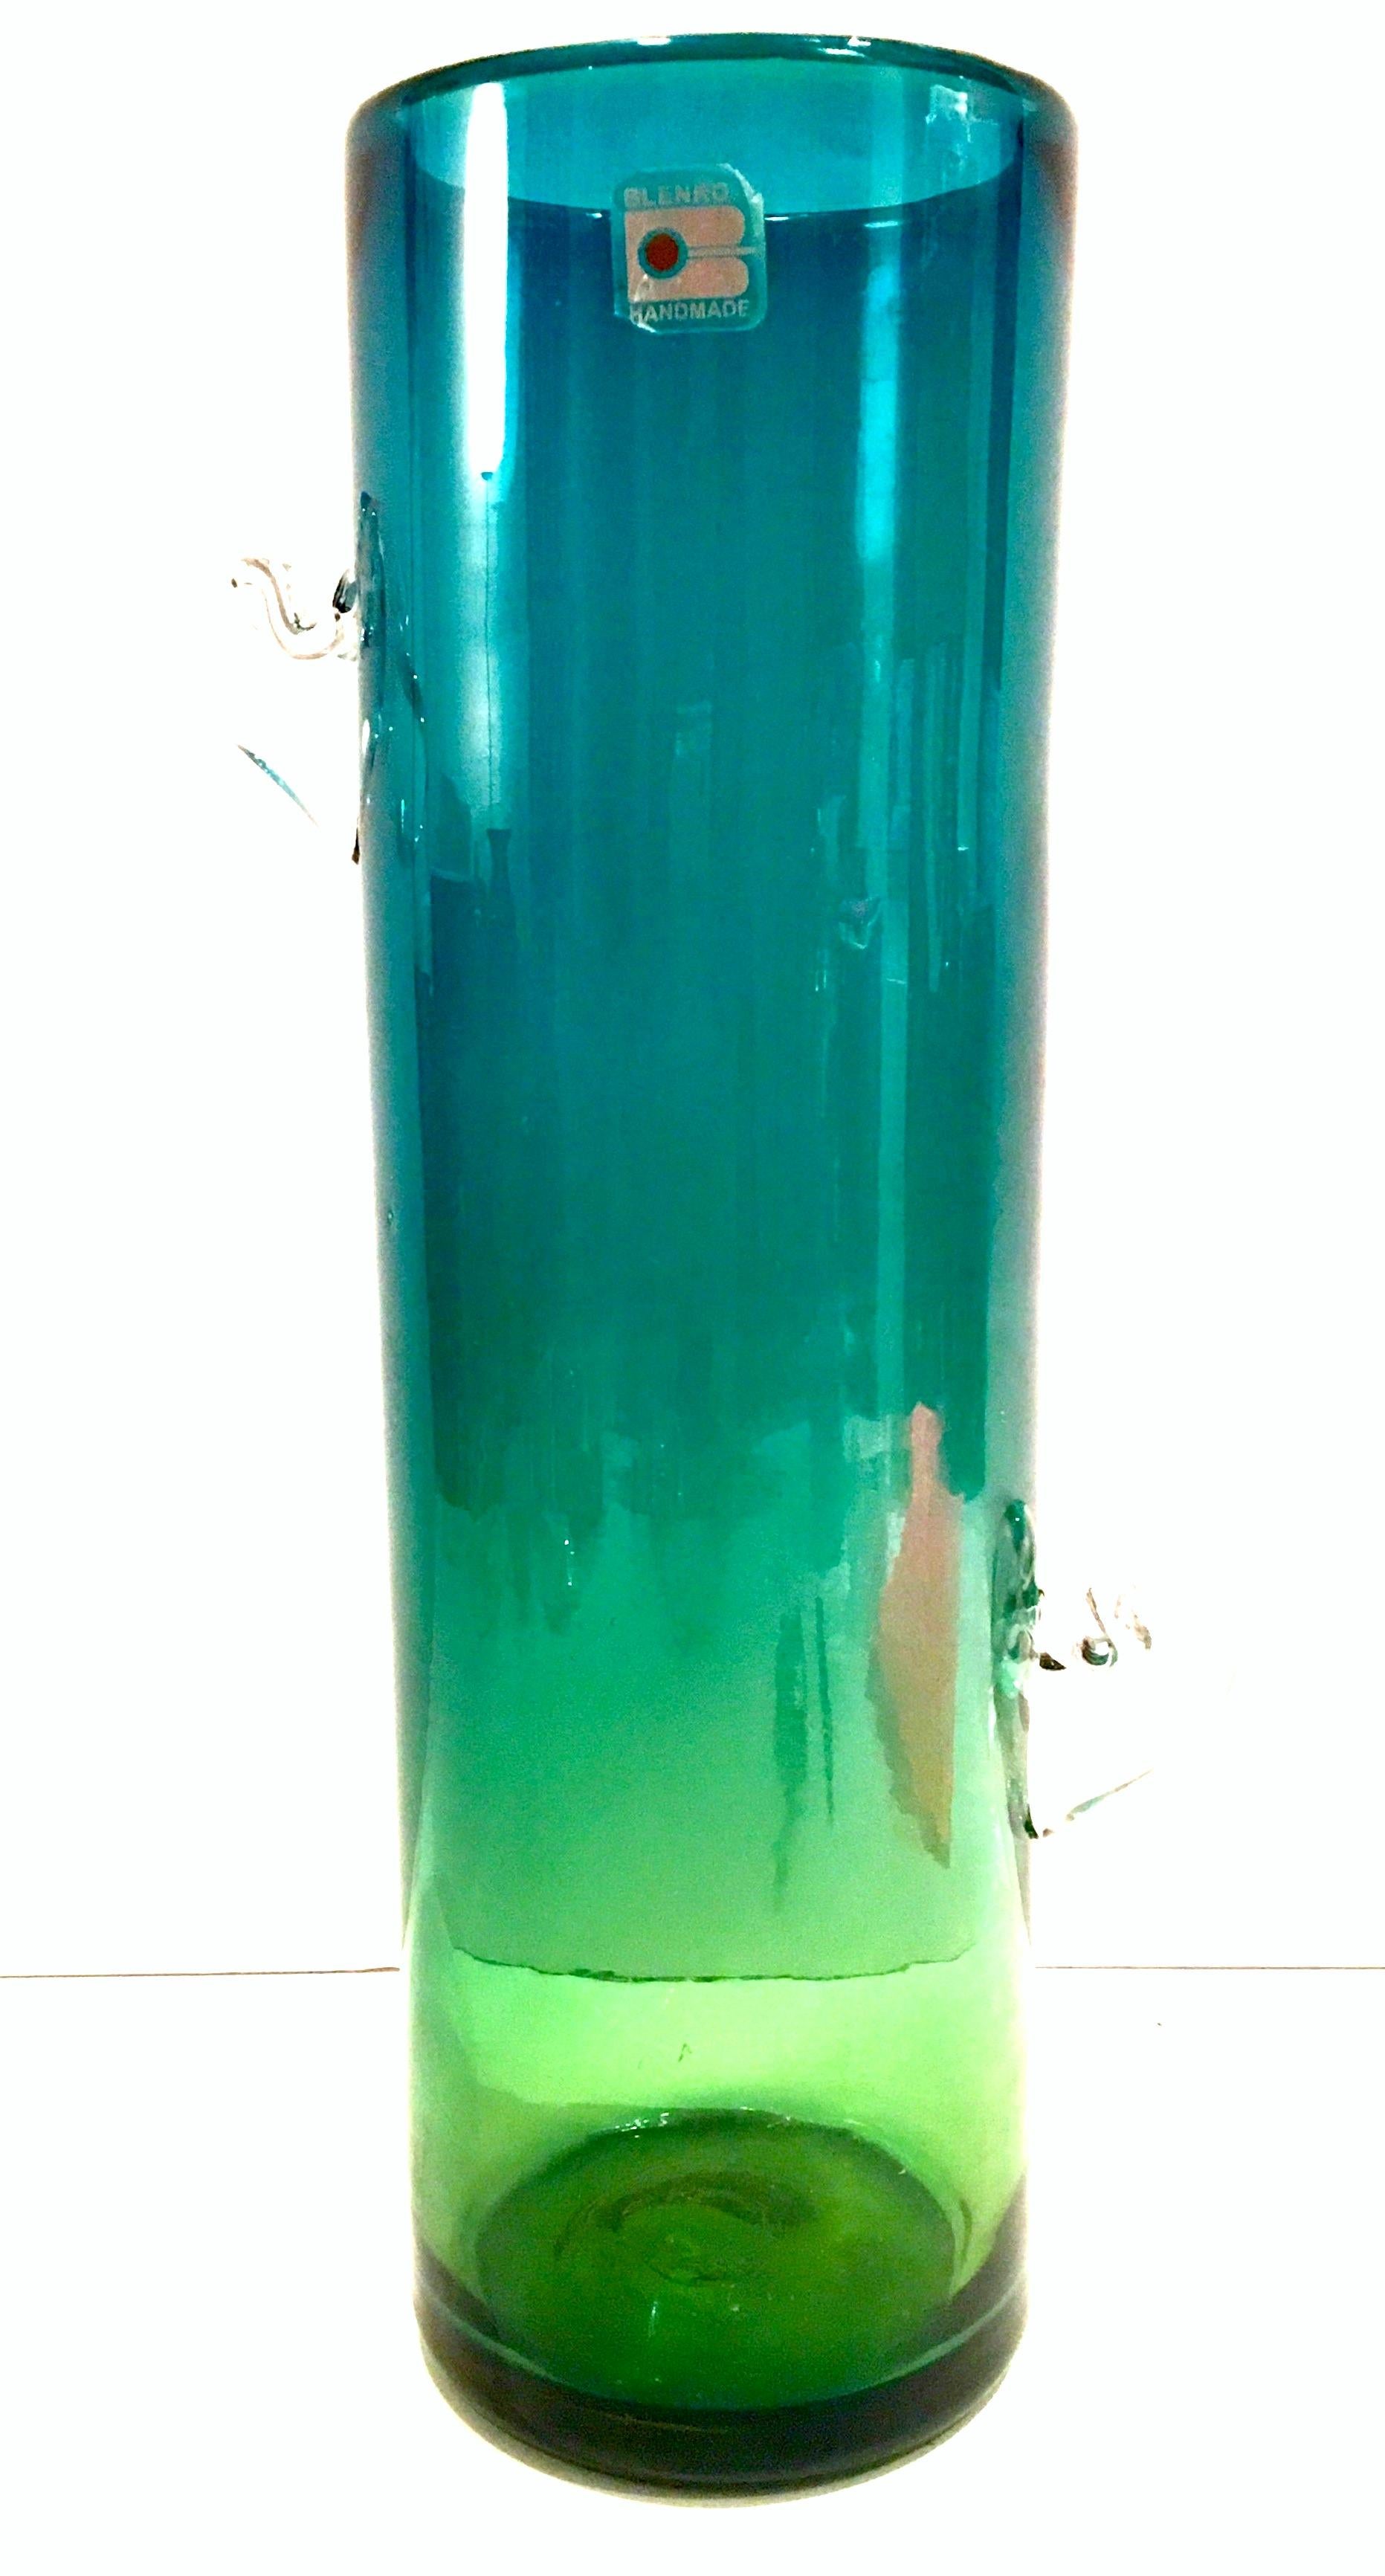 1980'S Organic modern Blenko blow glass blue and green ombre tall cylinder vase with clear applied abstract handles. Signed-original Blenko glass 